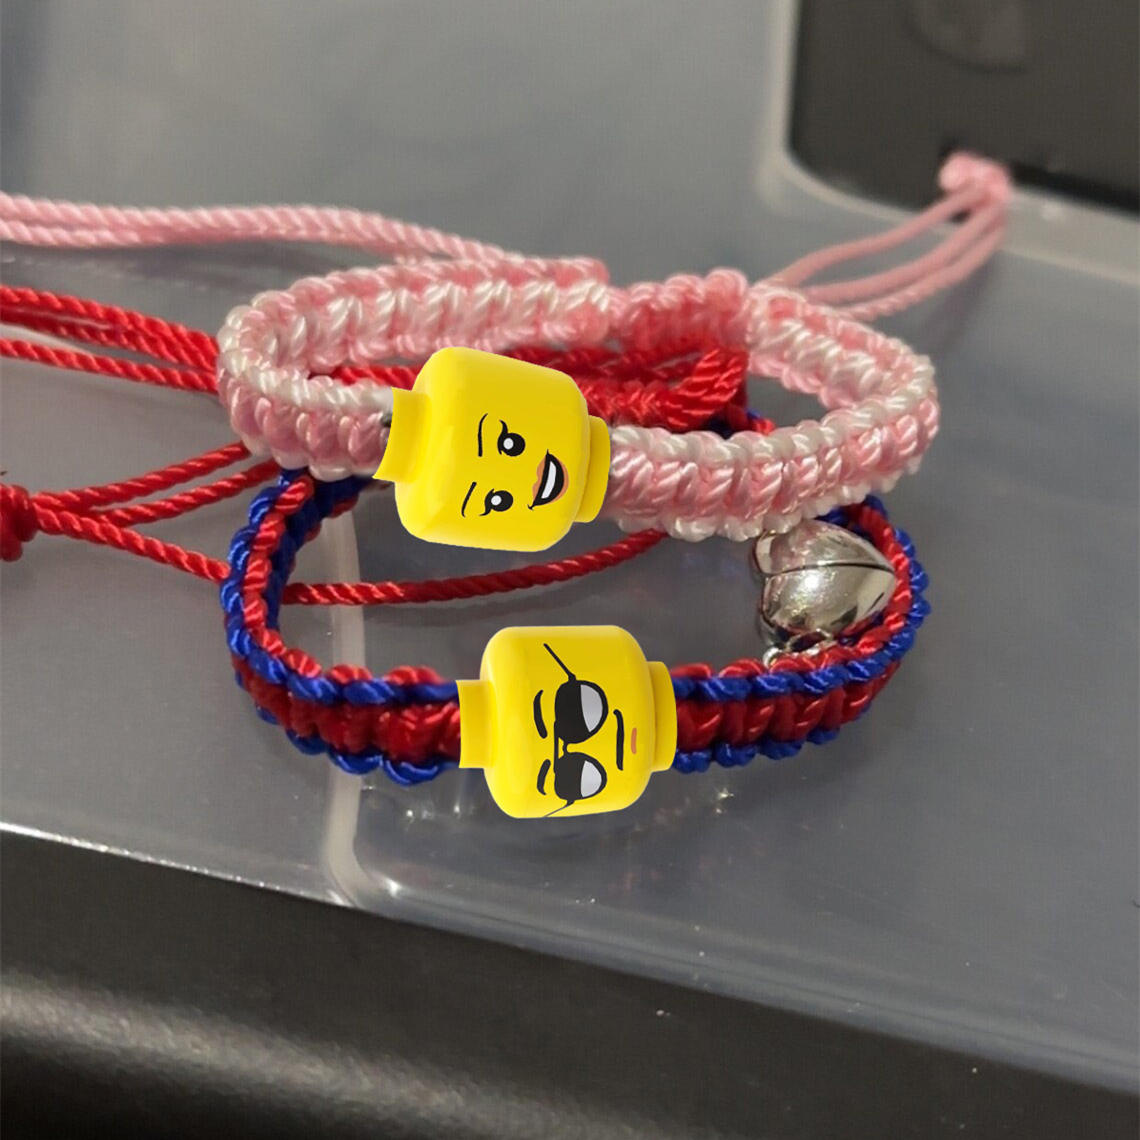 Customized Minifigure Bracelet: A Personalized Gift for Your Love